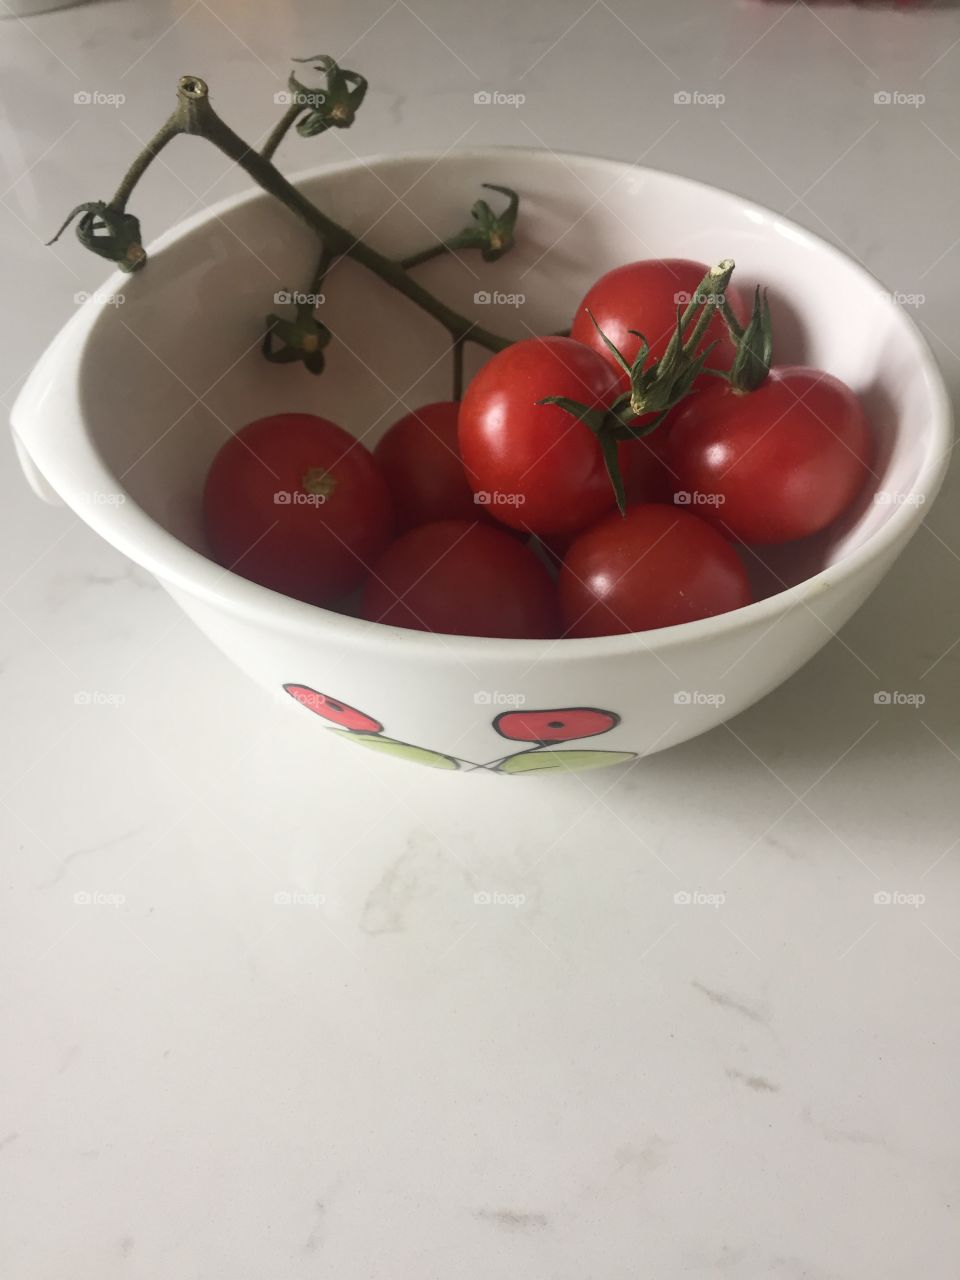 A bowl of small tomatoes